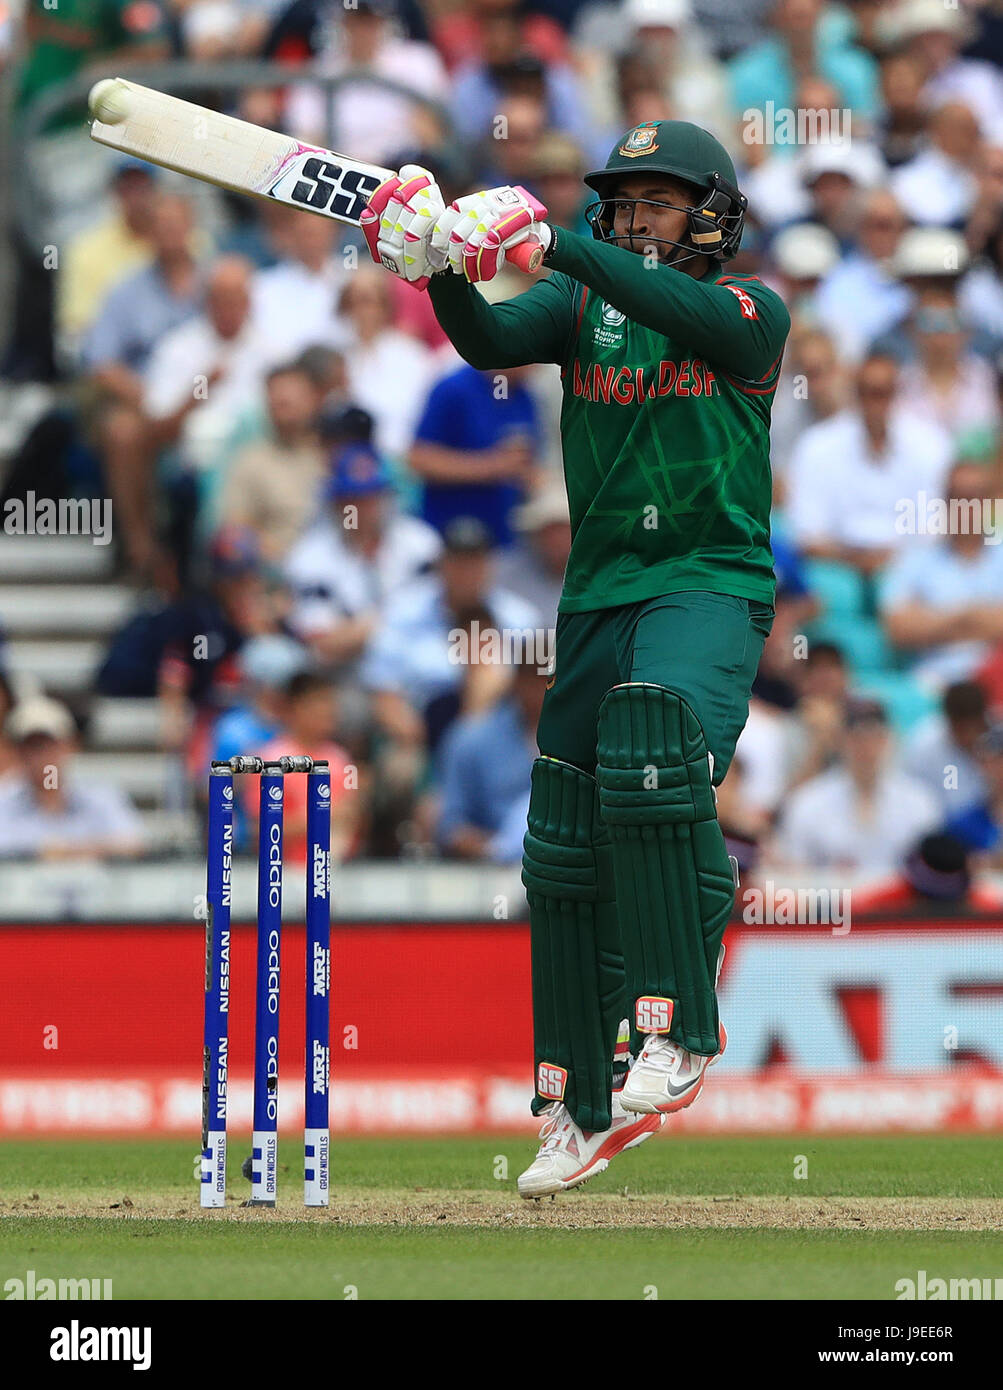 Bangladesh's Mushfiqur Rahim during the ICC Champions Trophy, Group A match  at The Oval, London Stock Photo - Alamy